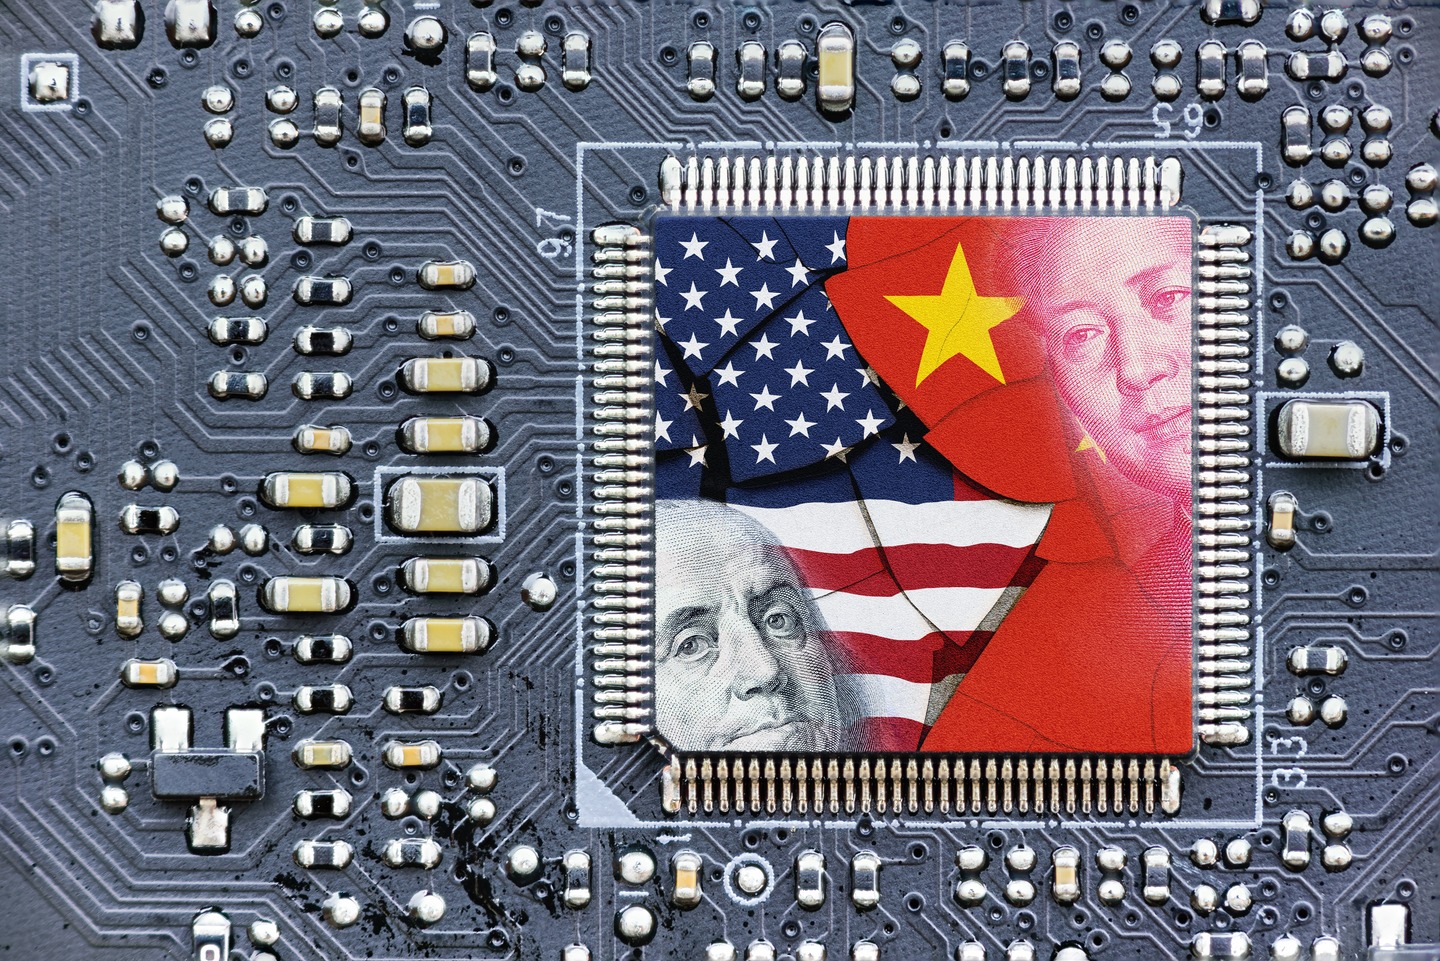 Chinese Hackers Targeting Critical US Infrastructure, FBI Says